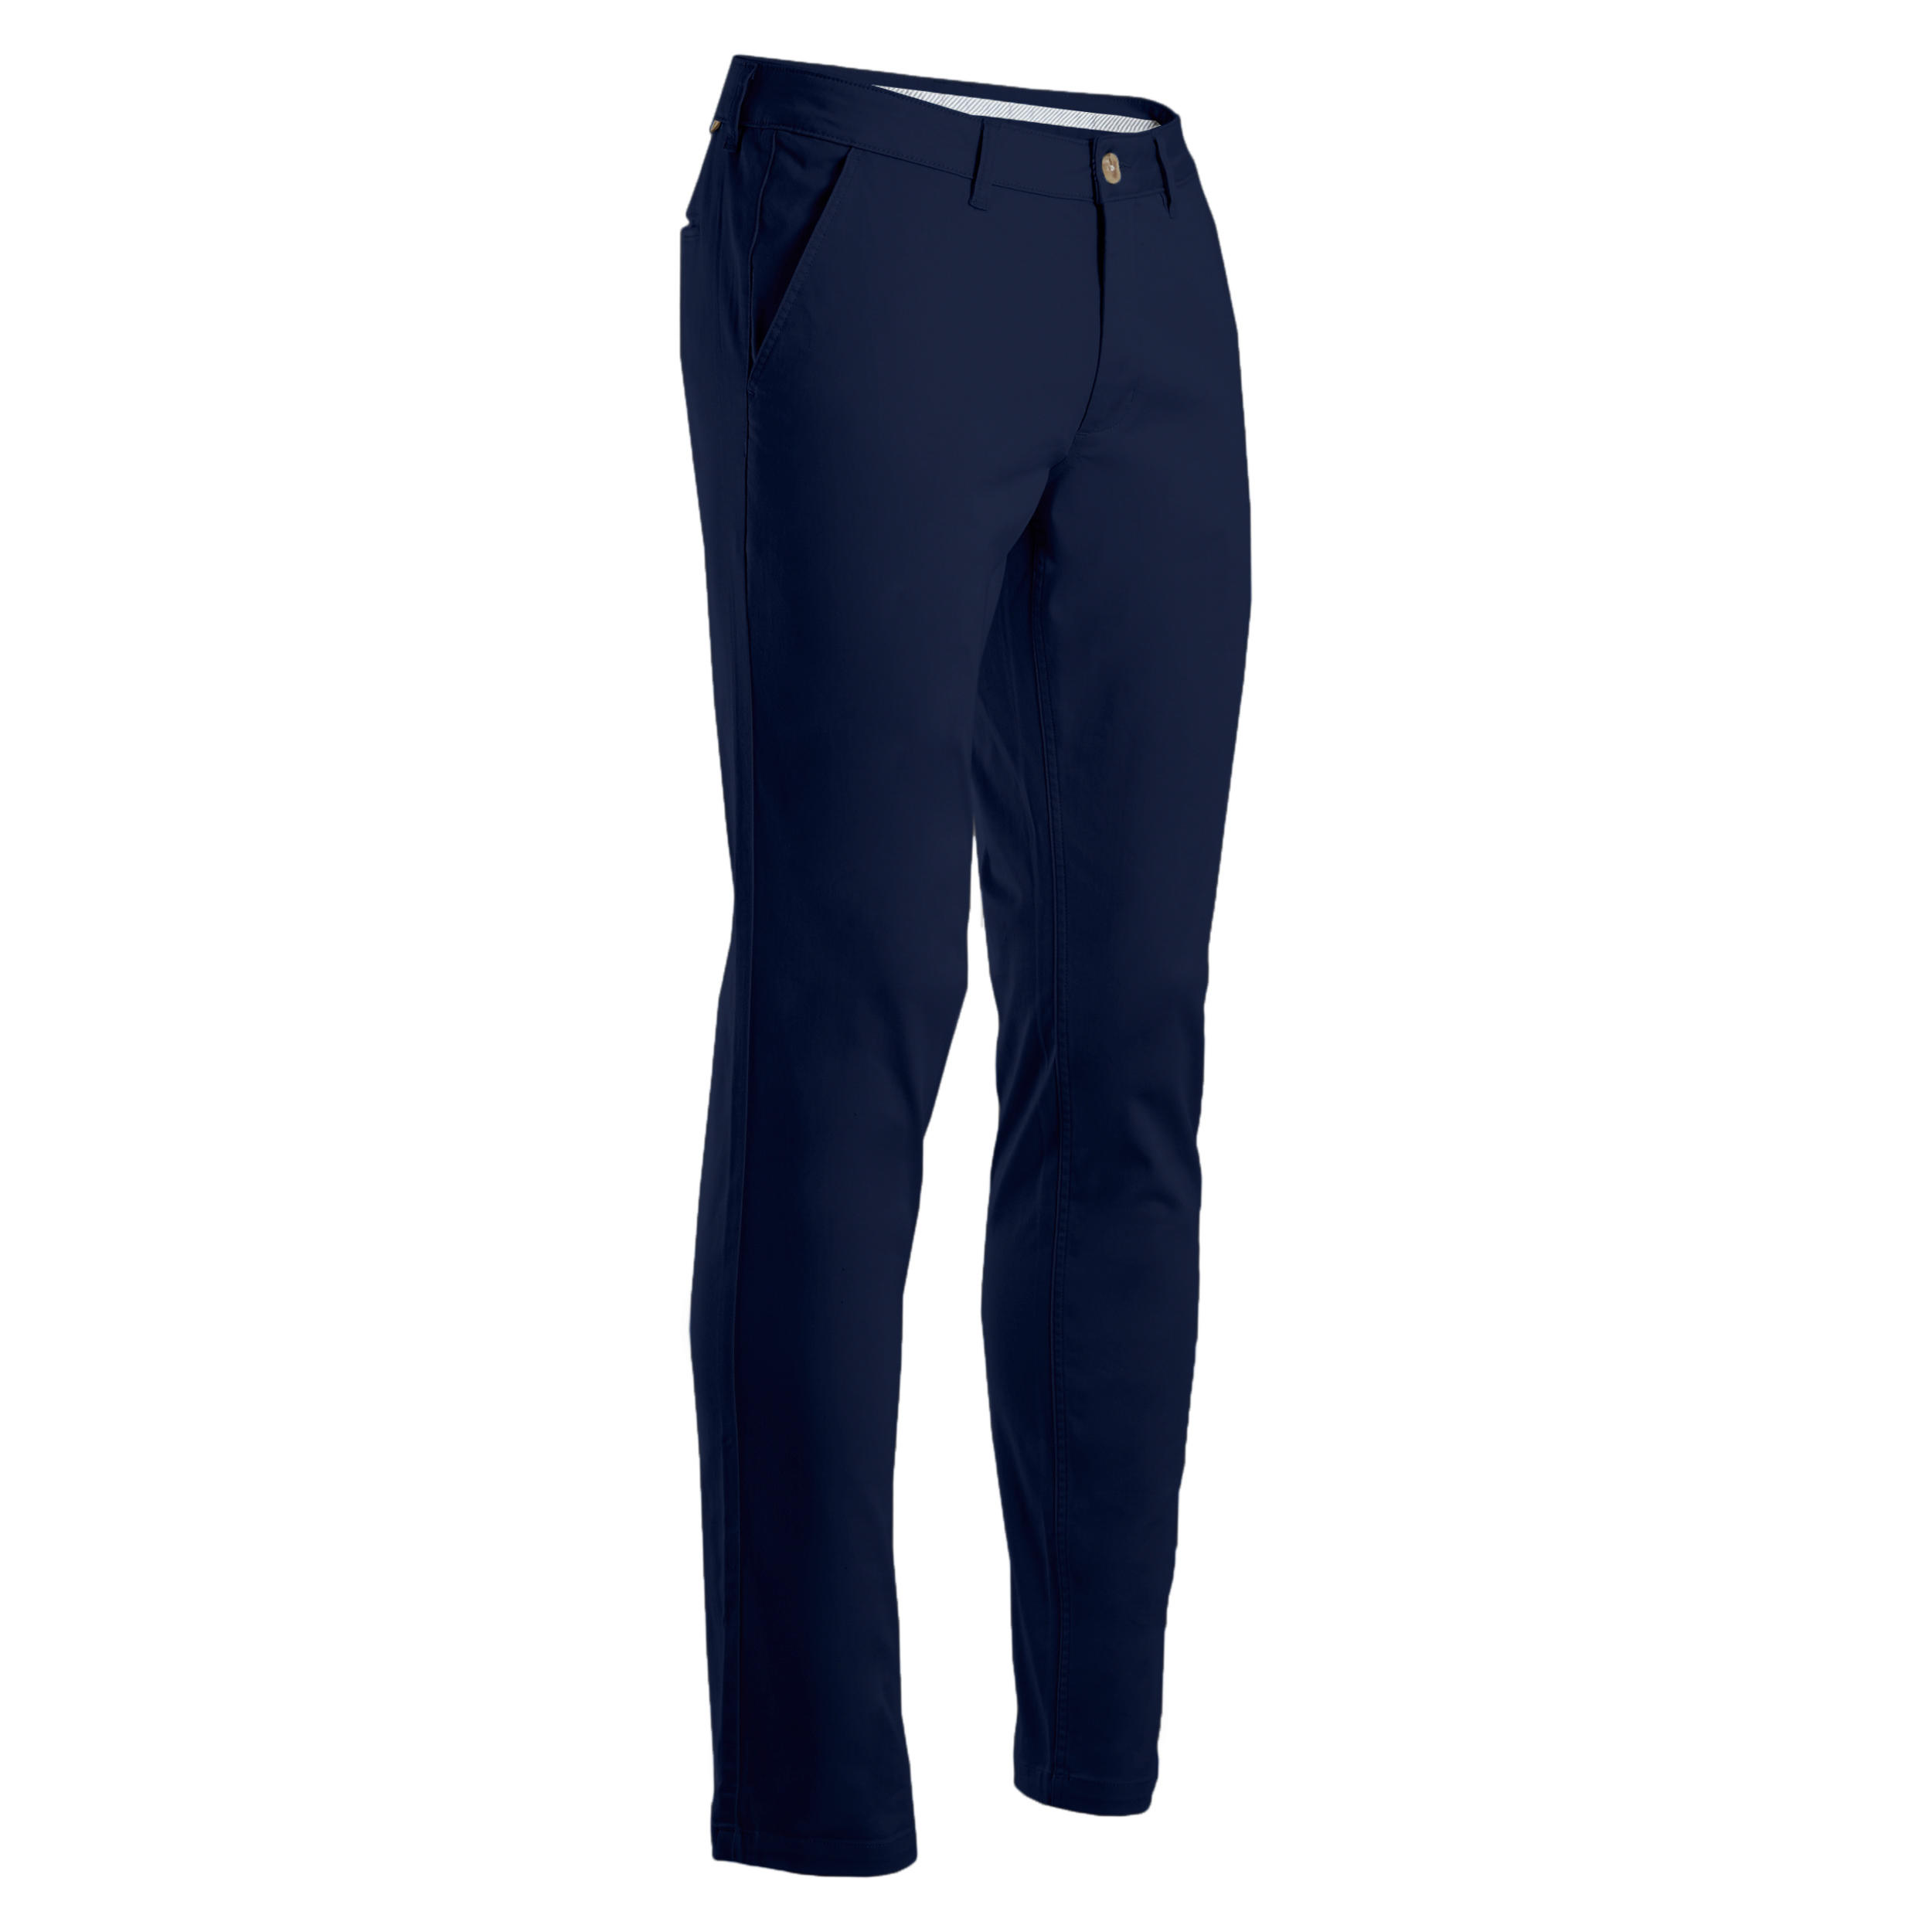 Men's Golf Pants - All in Motion Navy 30x30 1 ct